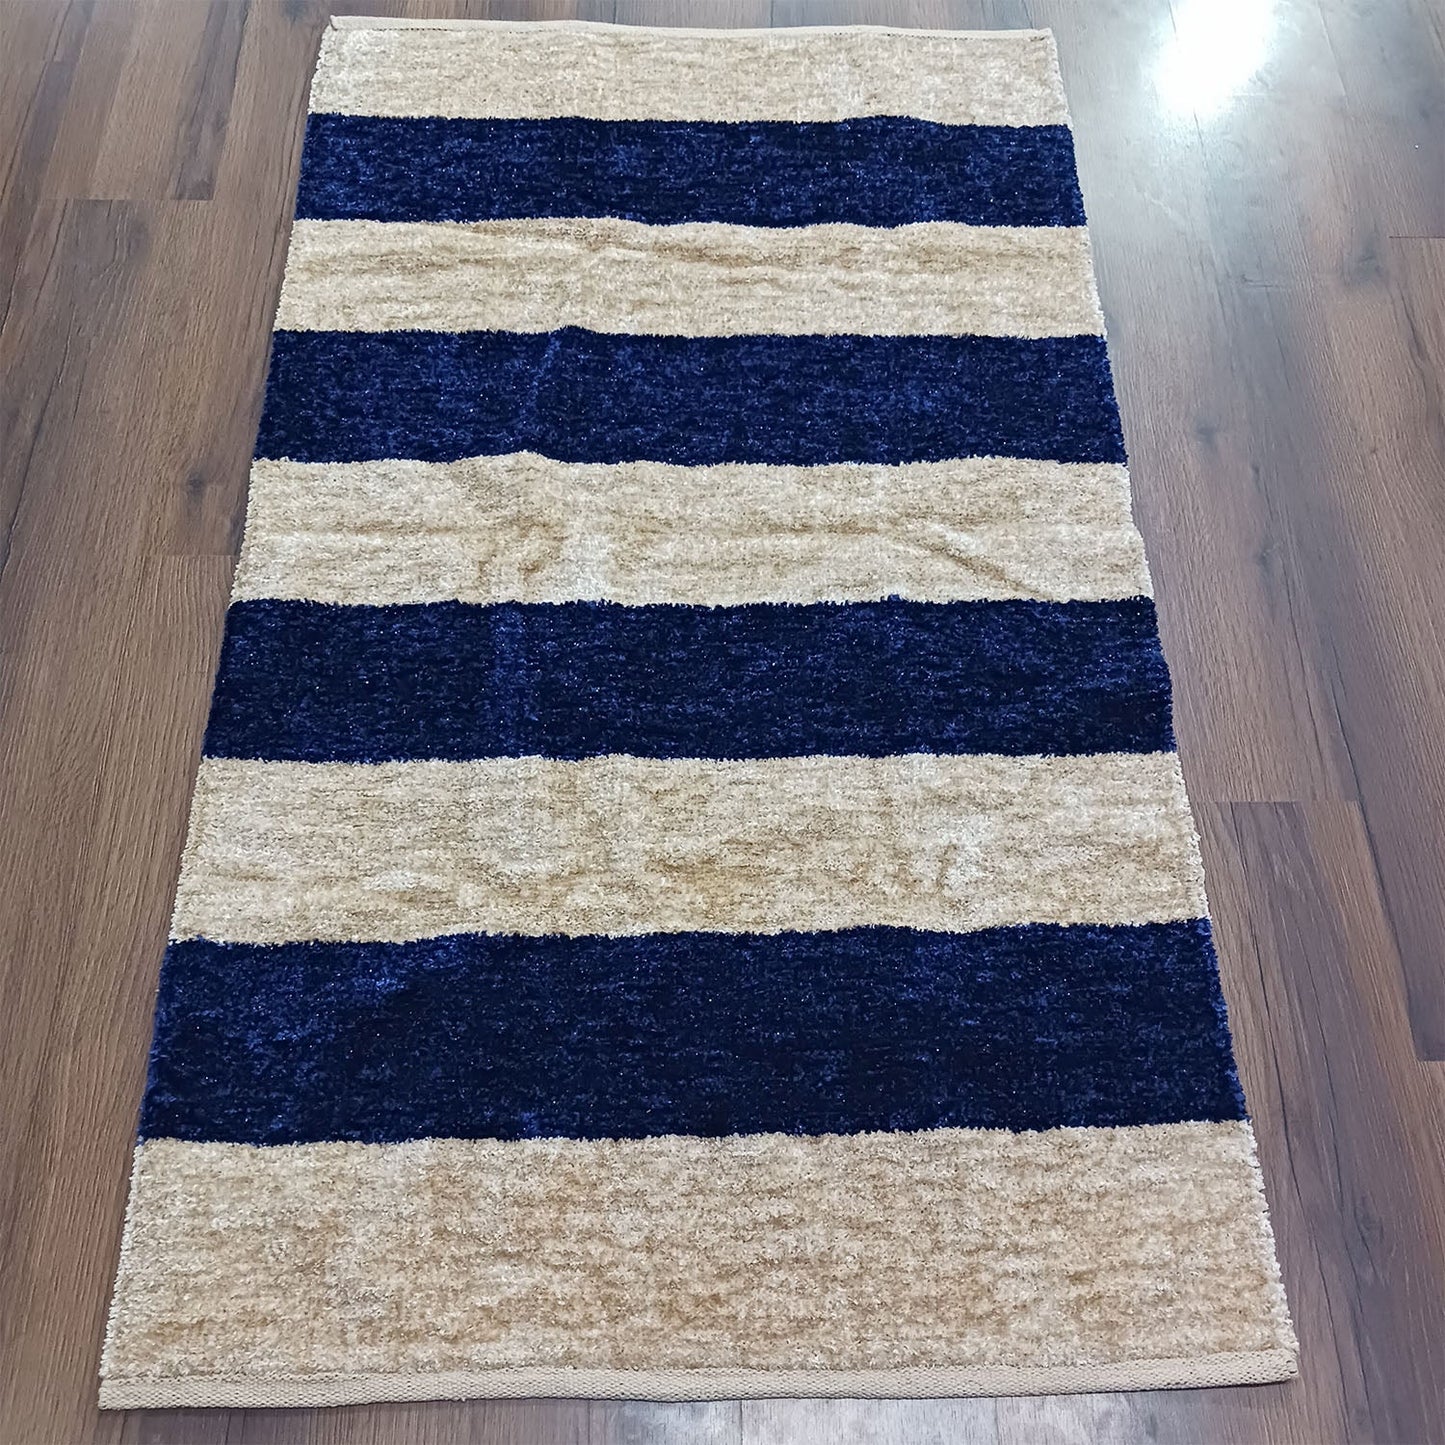 Avioni Handloom Rugs | Master Artisans Work | Feather like Luxurious Silk Soft Touch | Home Washable | Blue and White Broad stripes | Reversible